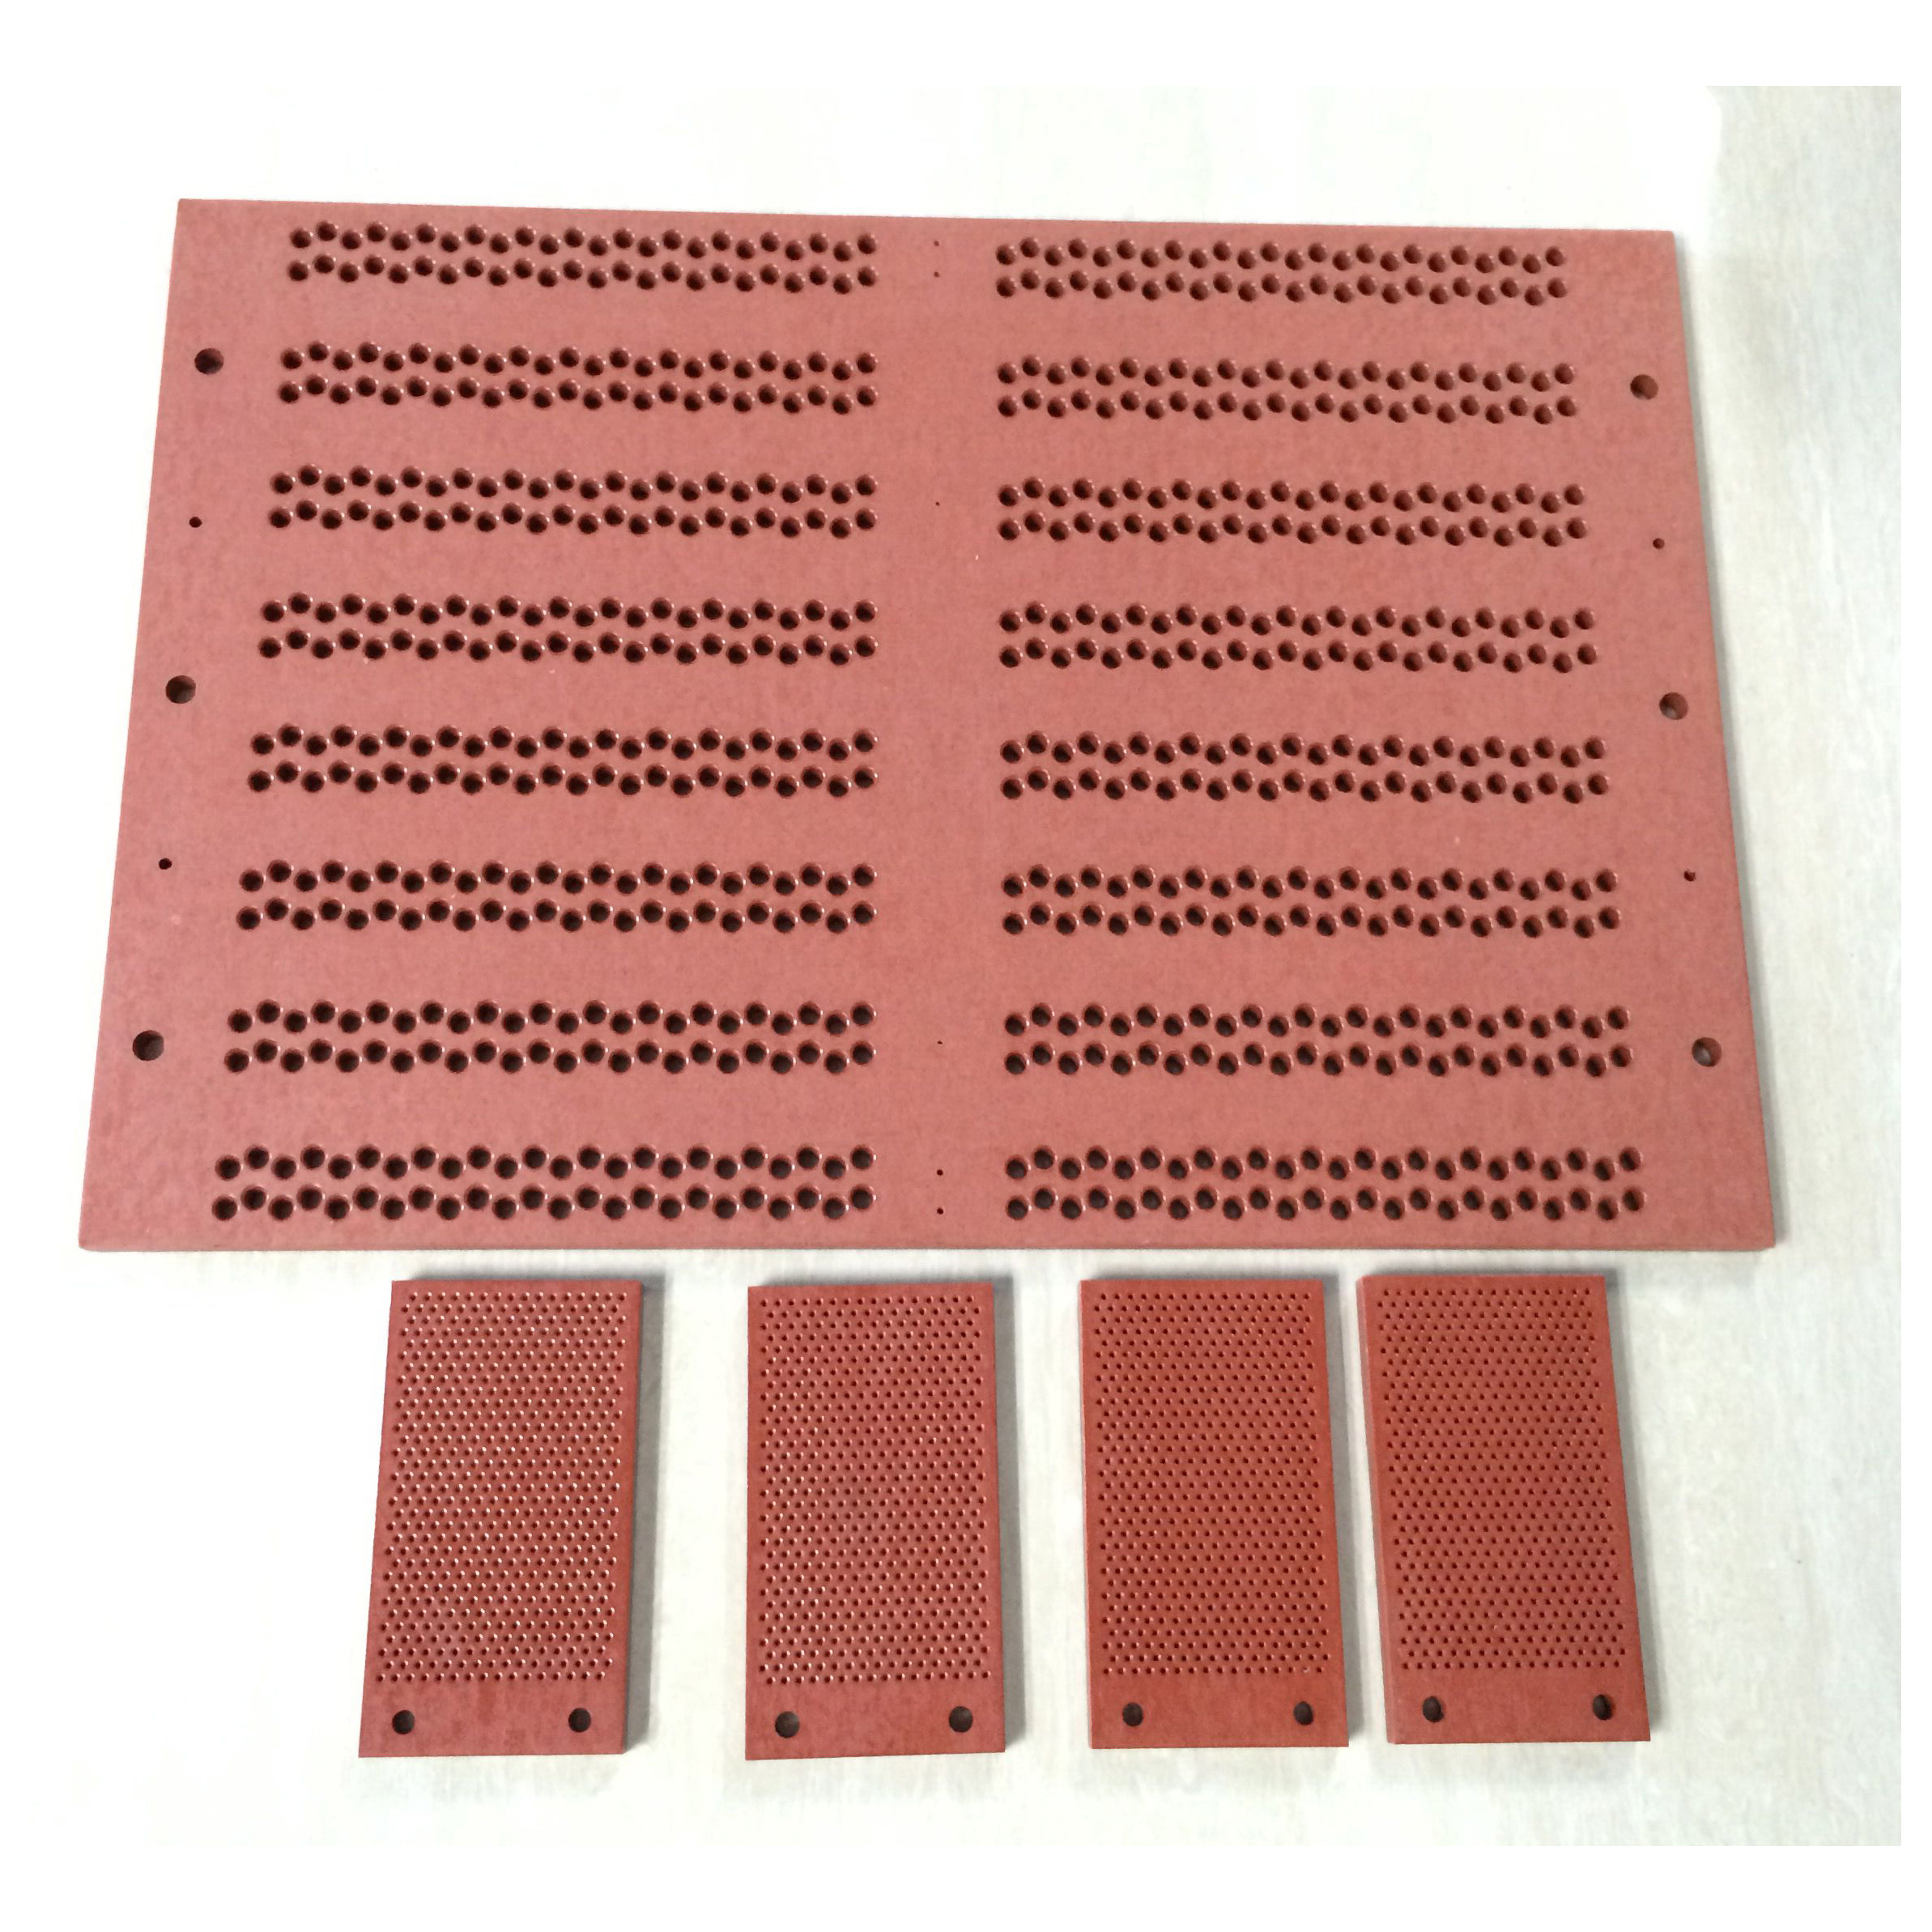 comber board and lower boards for NFJM loom-1